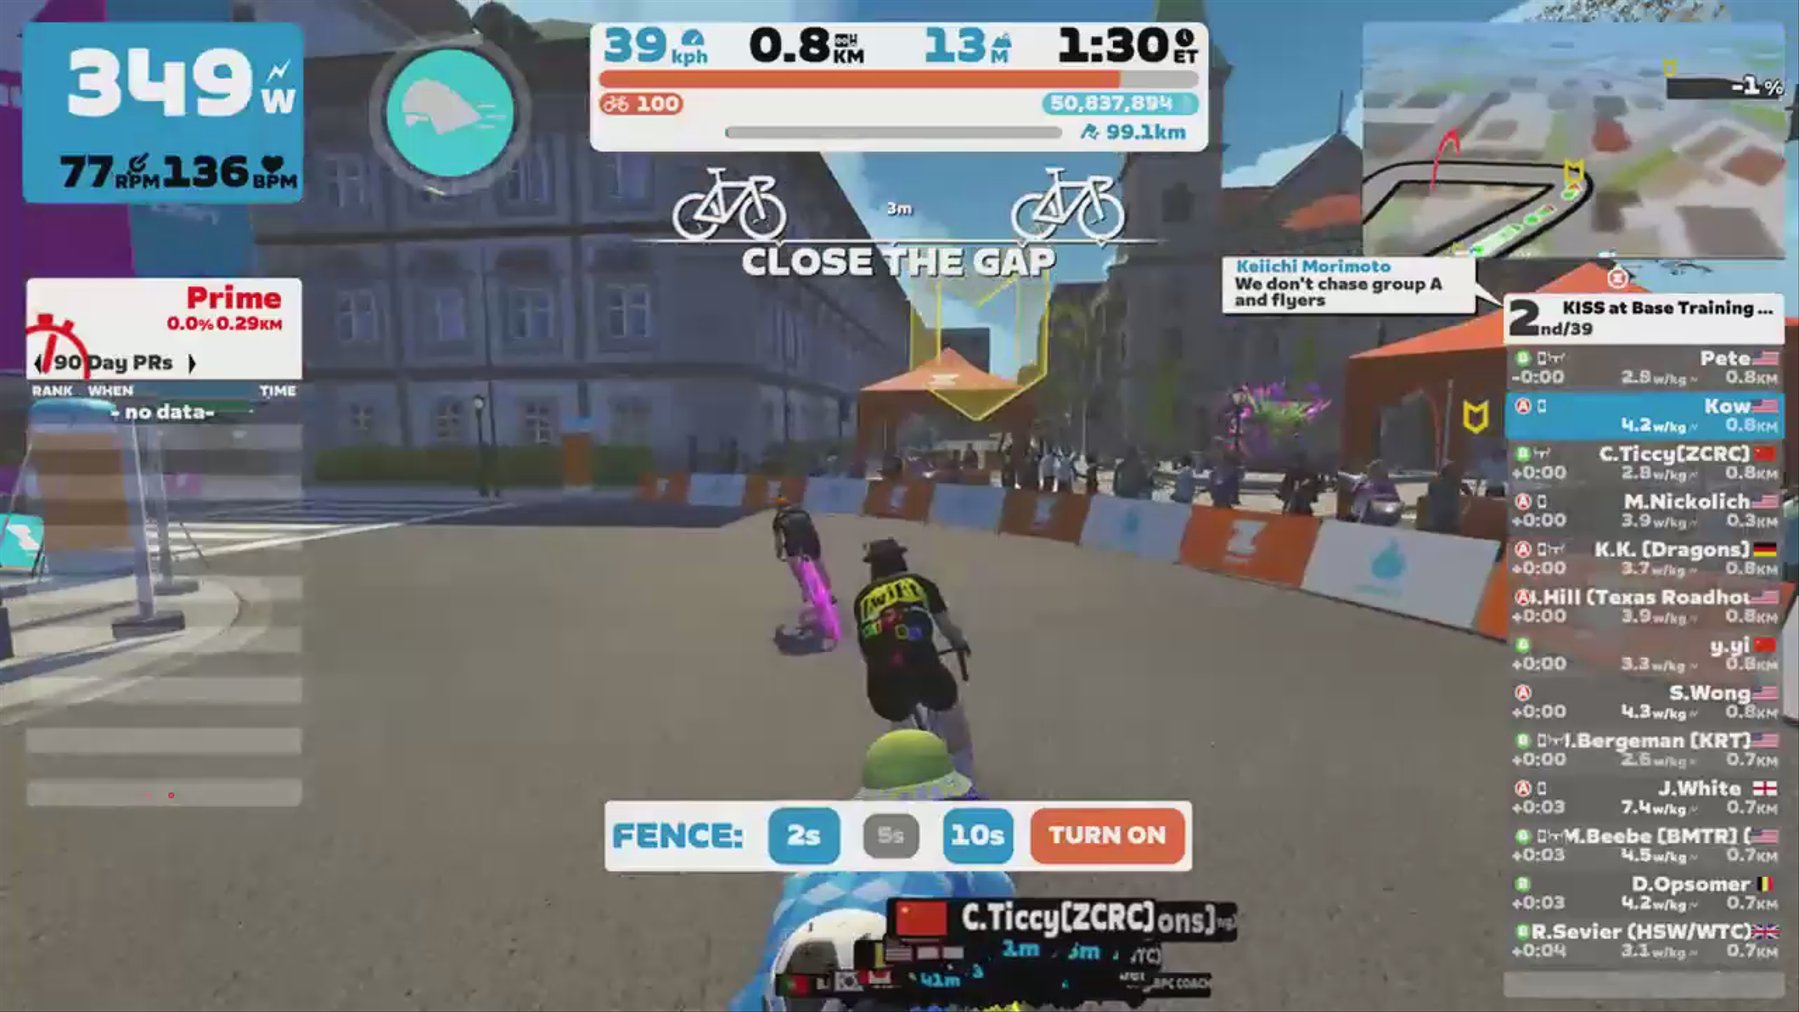 Zwift - Group Ride: KISS at Base Training Ride (A) on The Bell Lap in Crit City